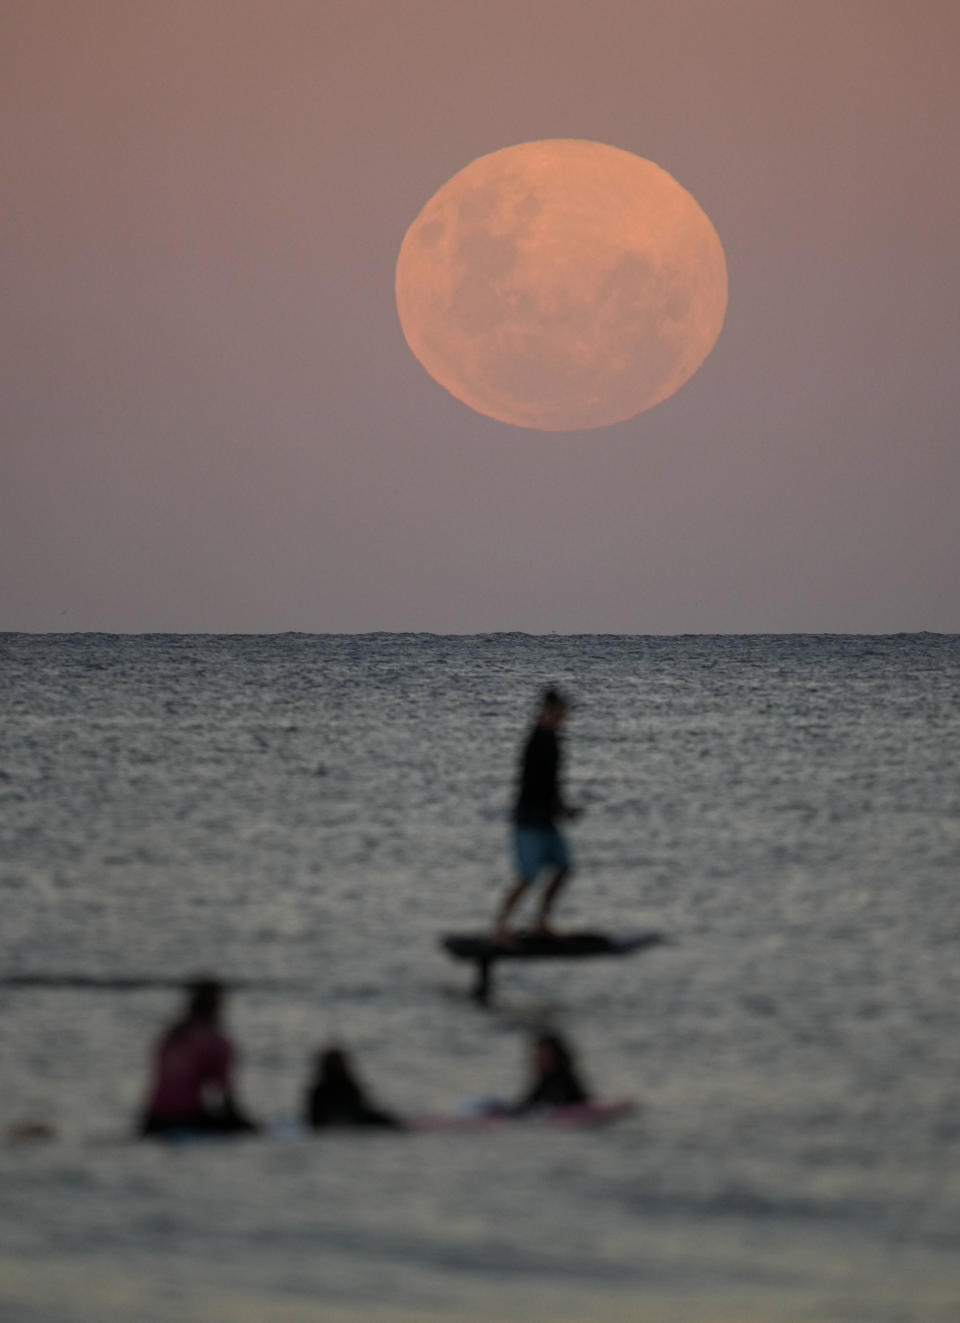 The moon rises as surfers wait for waves in Sydney Wednesday, May 26, 2021. A total lunar eclipse, also known as a Super Blood Moon, will take place later tonight as the moon appears slightly reddish-orange in colour. (AP Photo/Mark Baker)